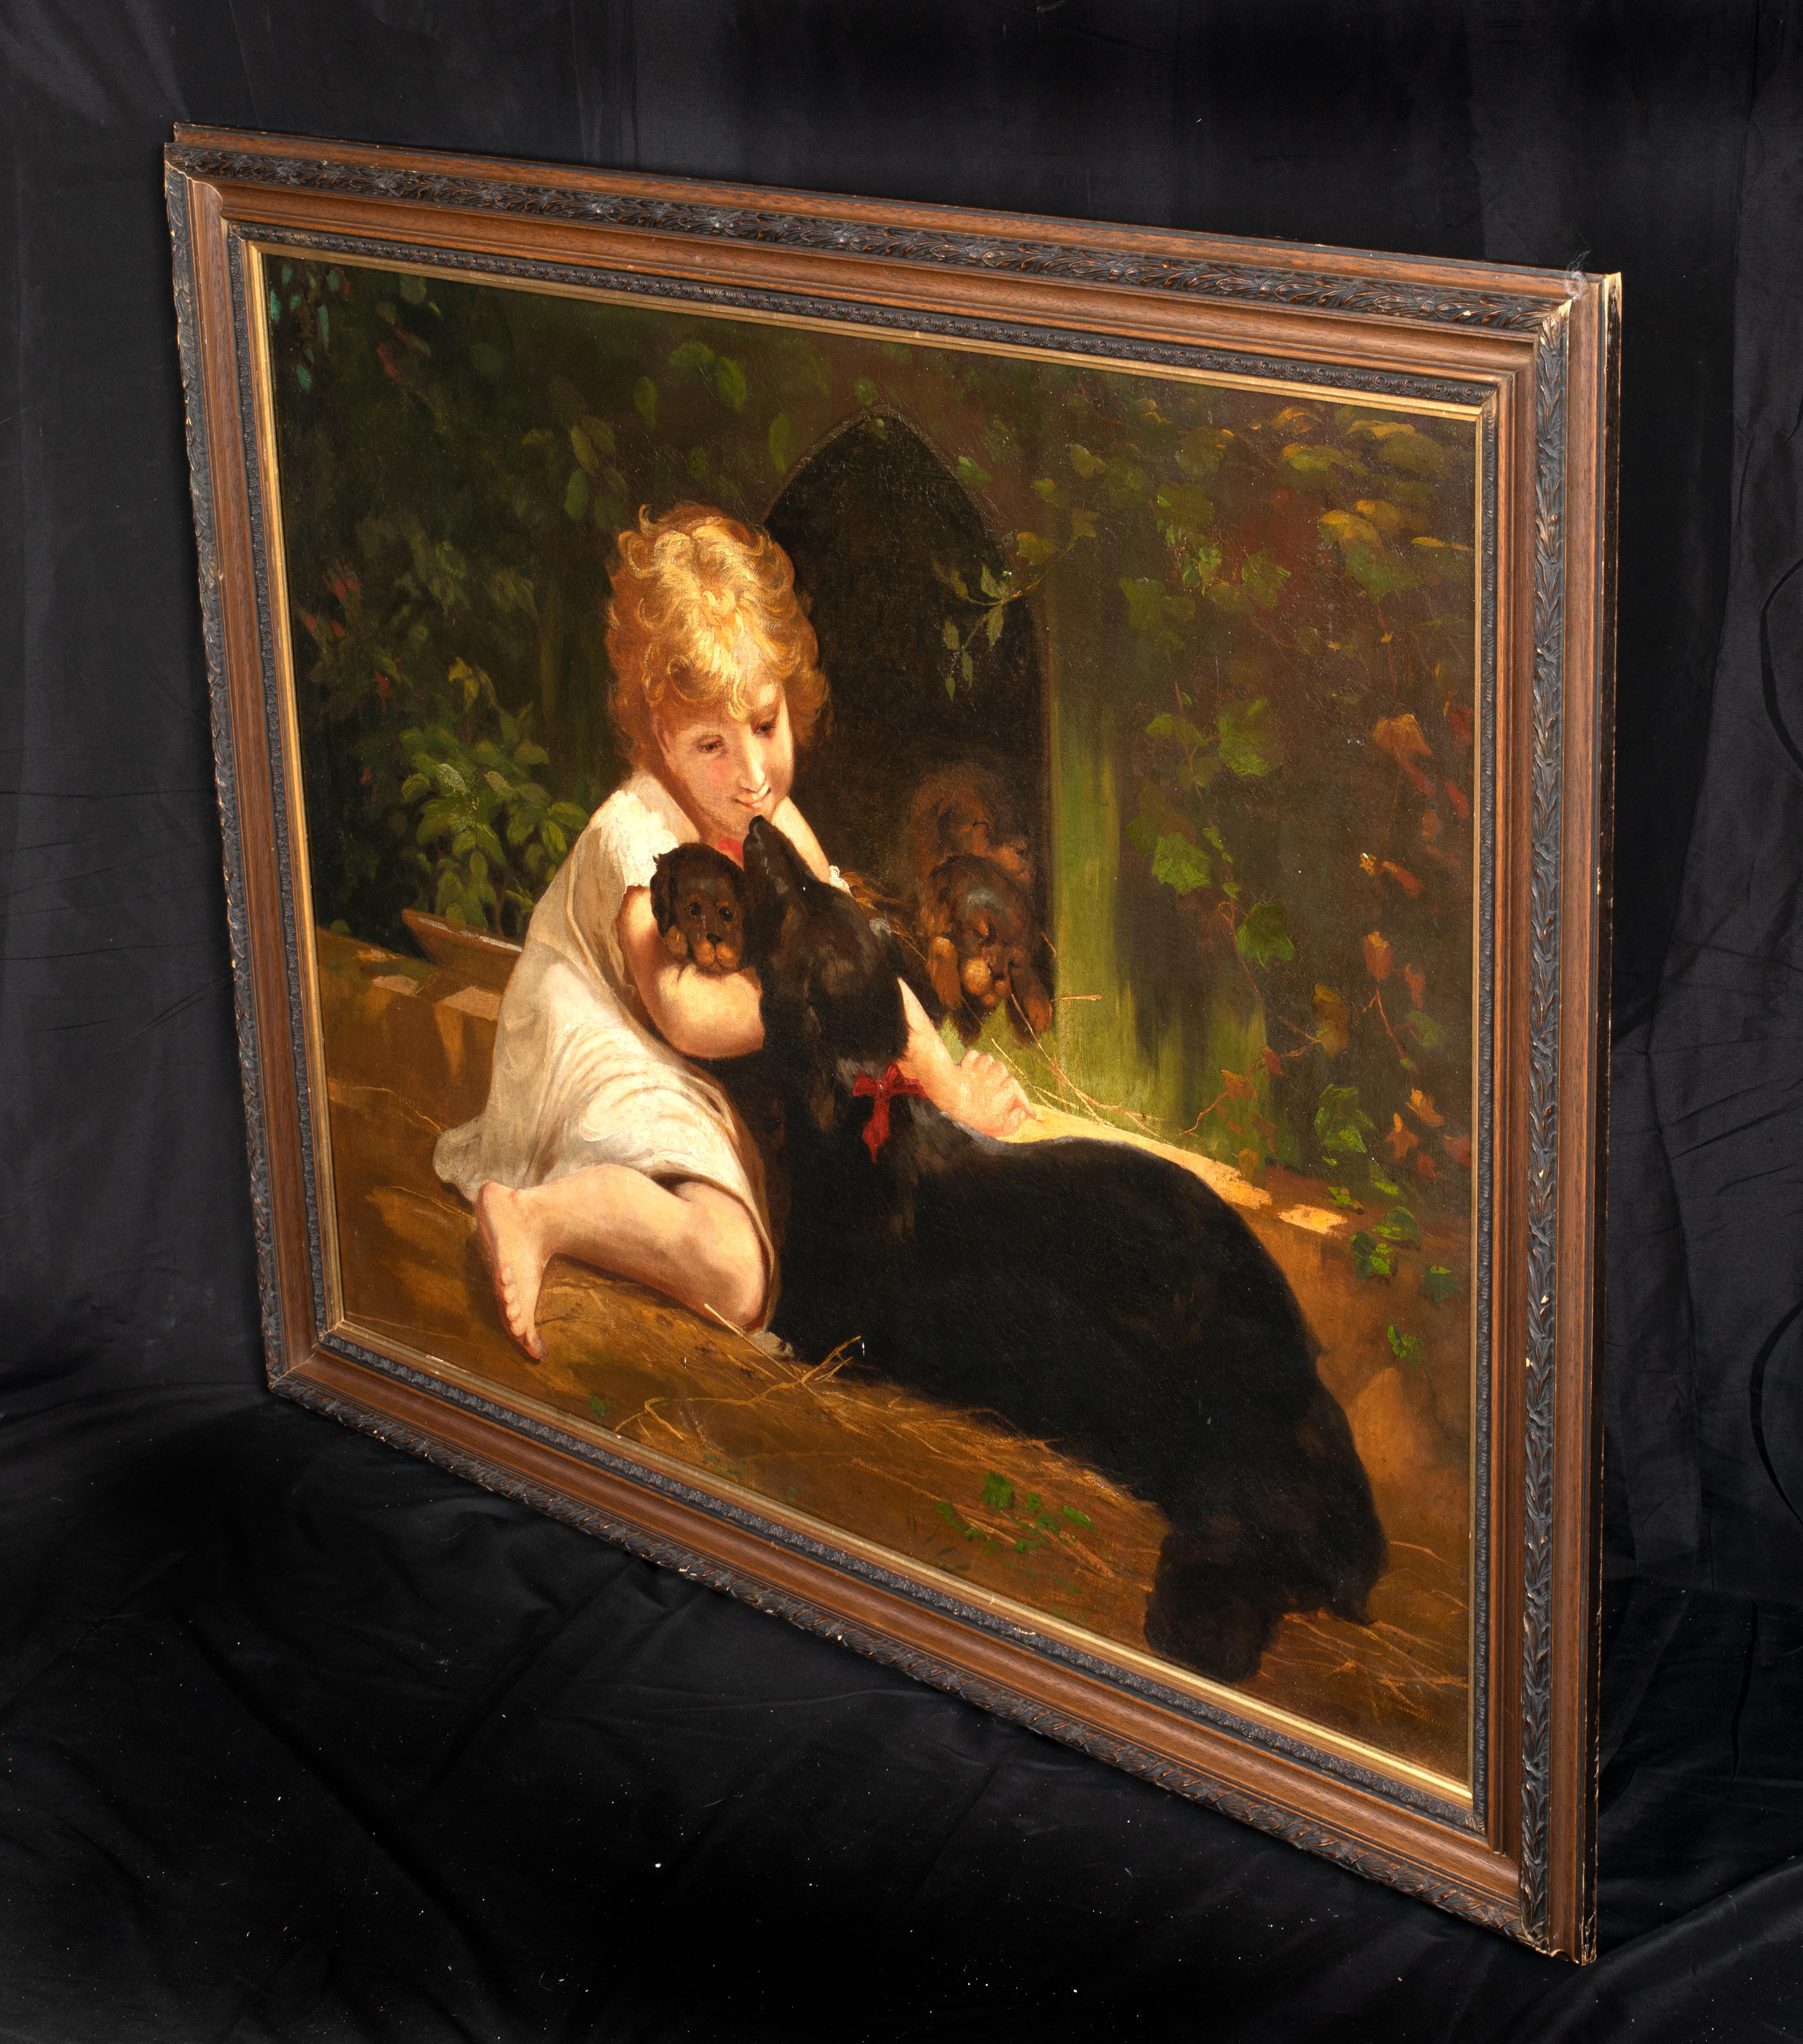 Portrait Of A Girl, Dachshund & Puppies, 19th Century

English School

Large 19th Century English School portrait of a girl in a garden with a Dachshund and her puppies, oil on canvas. Good quality and condition large scale scene circa 1890.